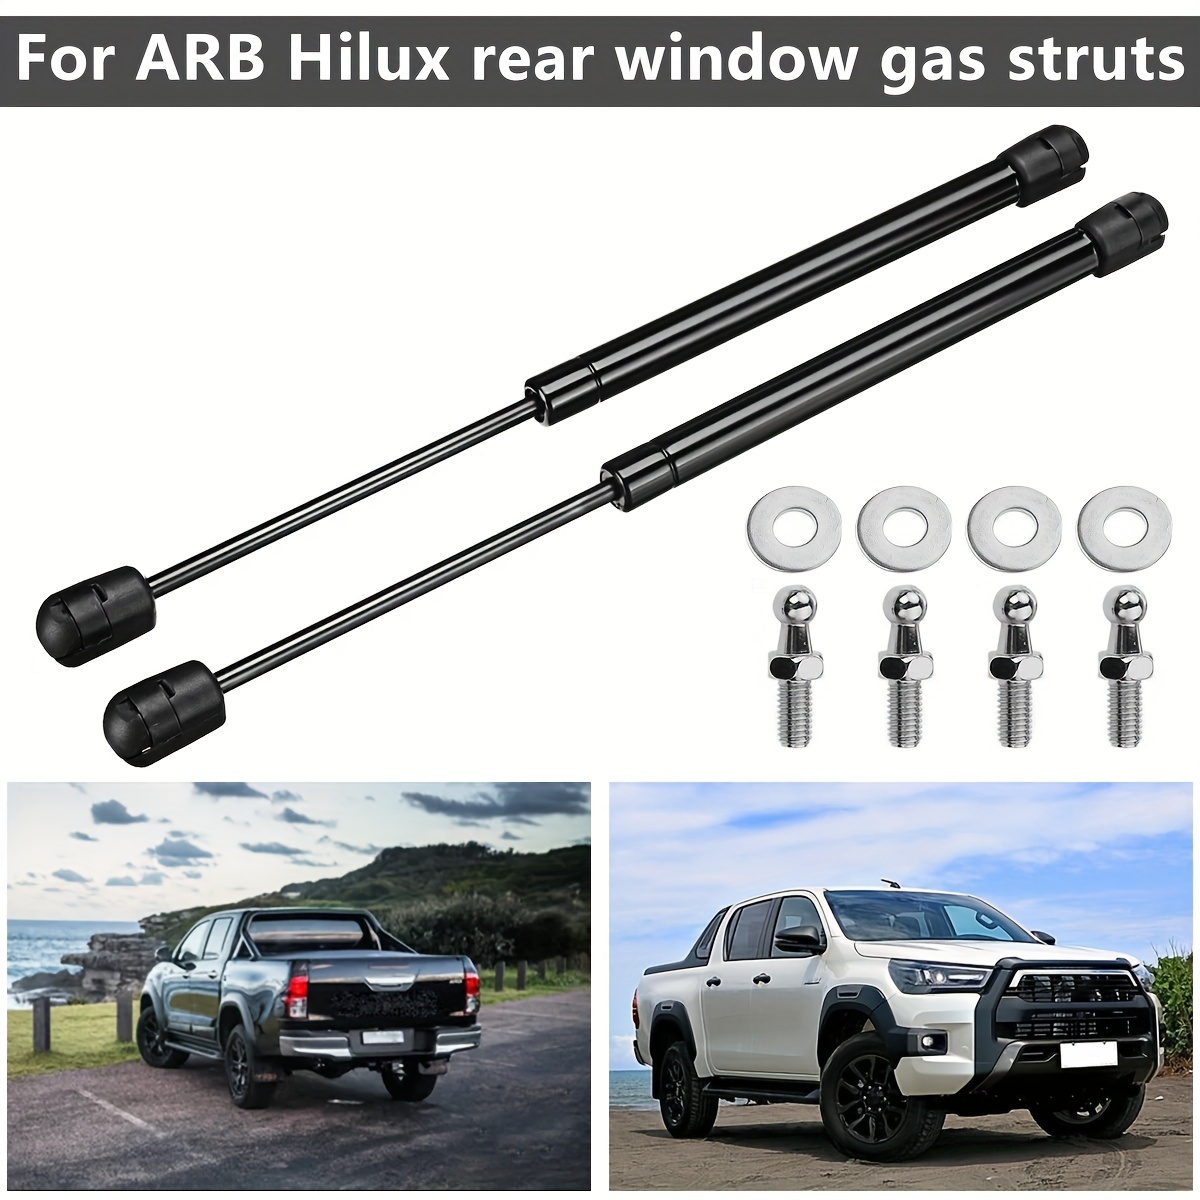 

2packs 160n Gas Struts Stainless Steel Gas Strut Lift Support 12.8in Gas Prop Spring Struts With 4 Screws Sets